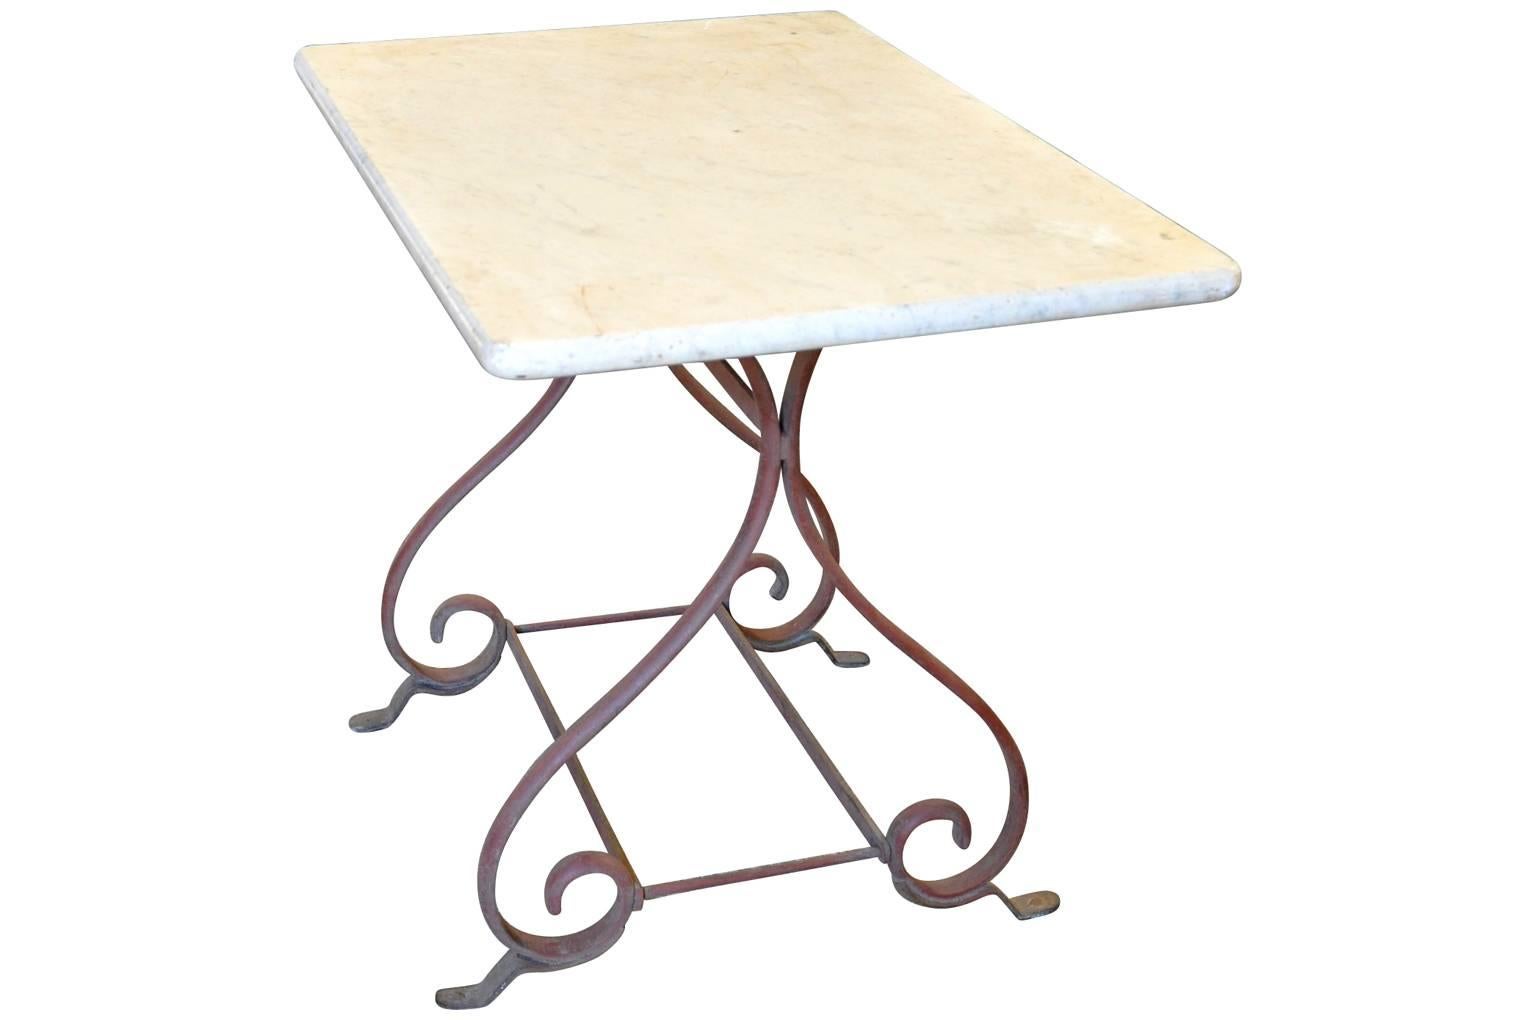 French 19th century butcher table in painted cast iron with its original marble top from the Provenance area in France. These wonderful tables were originally used in the butcher shops to display meat from. A fabulous piece as a kitchen island or